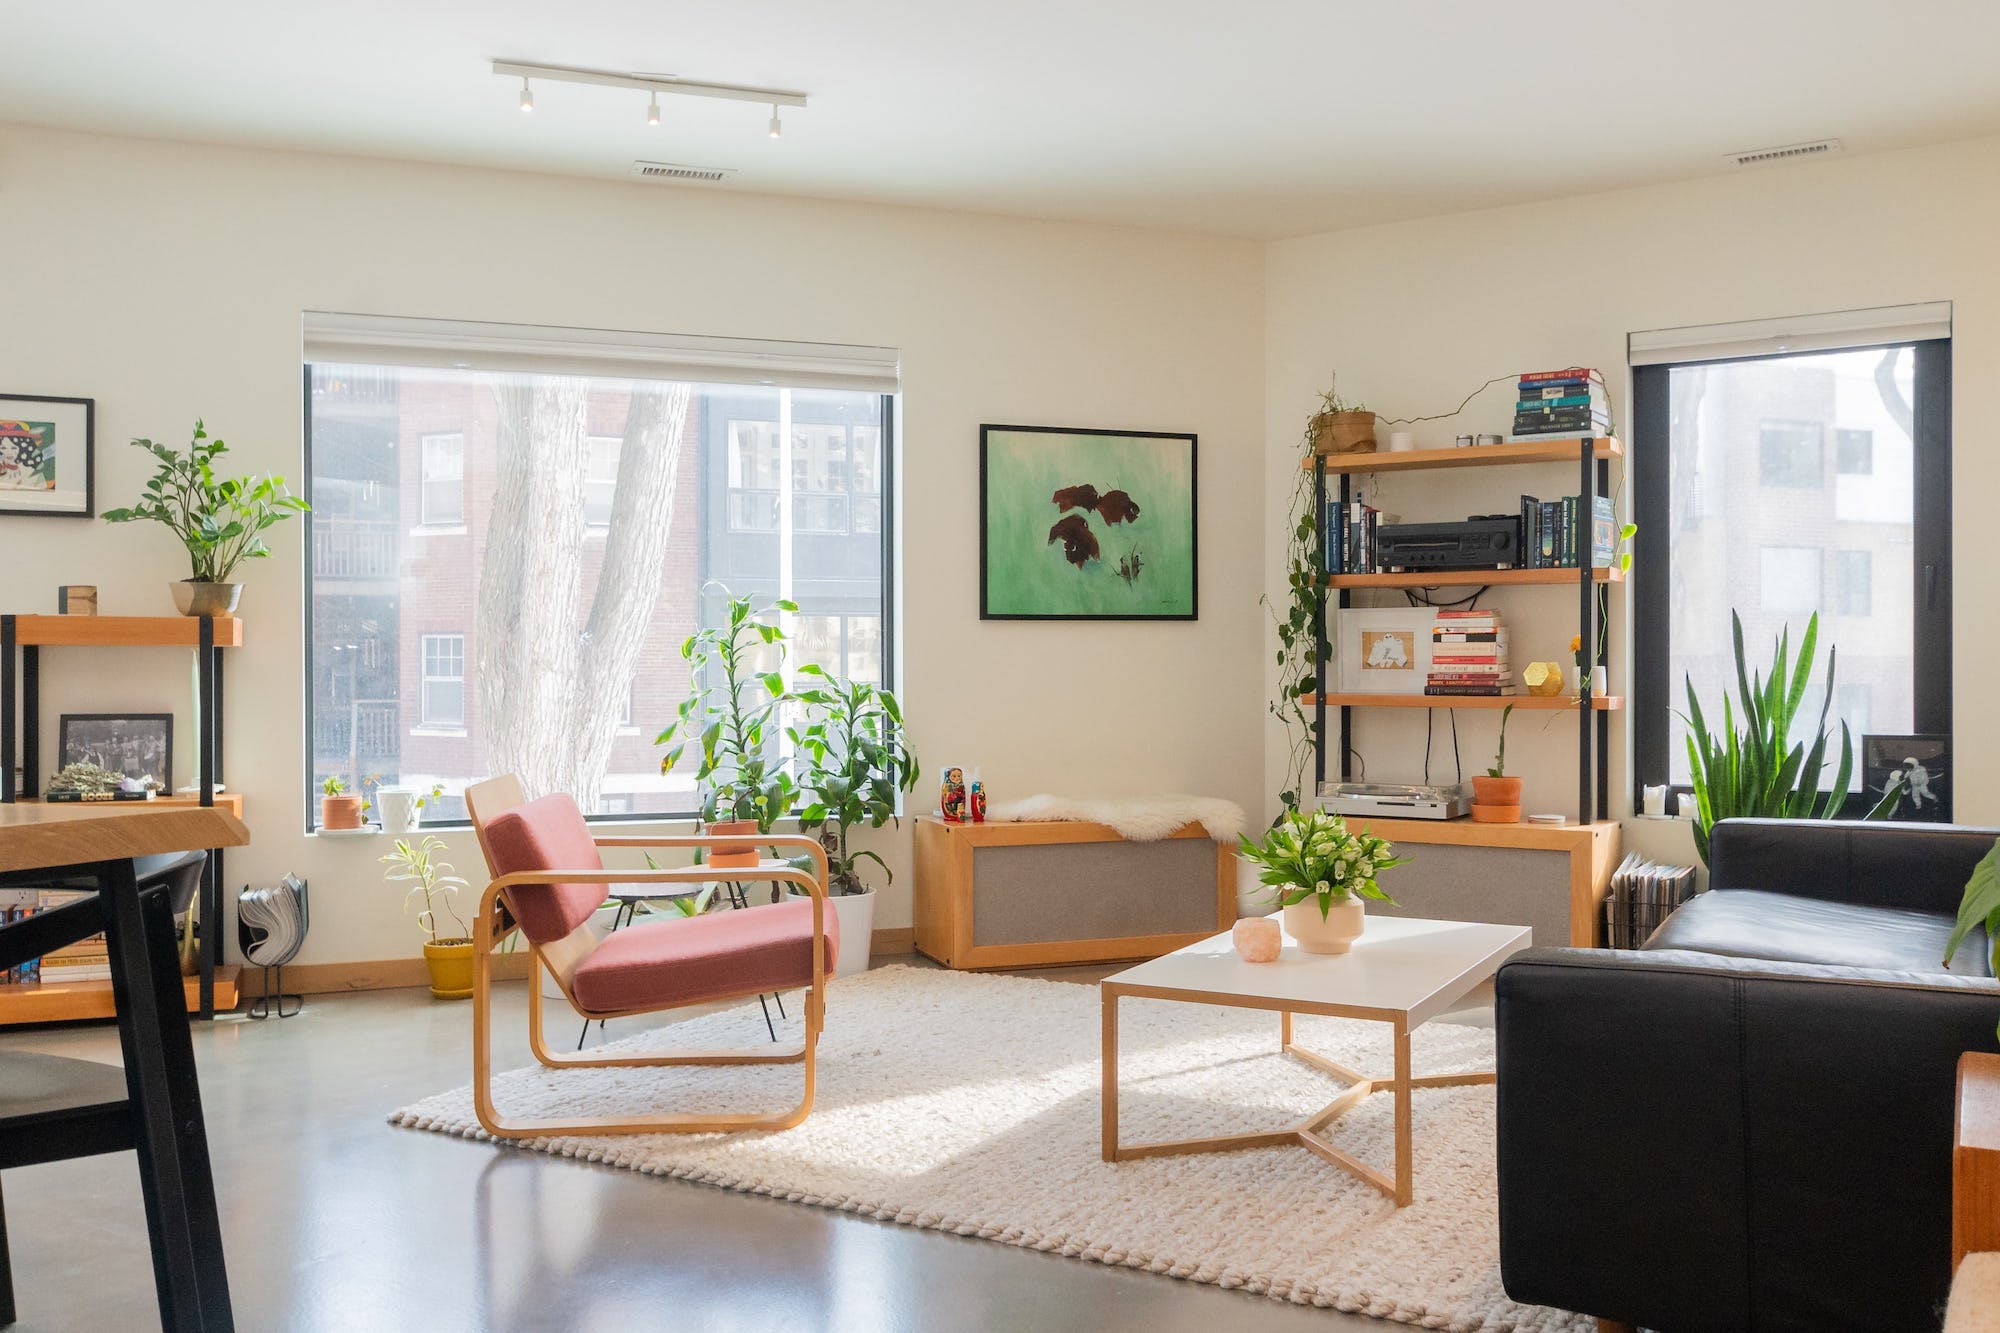 Is owning a rental property worth it? Image shows a furnished lounge room in an article about owning rental property and if renting a house is worth it